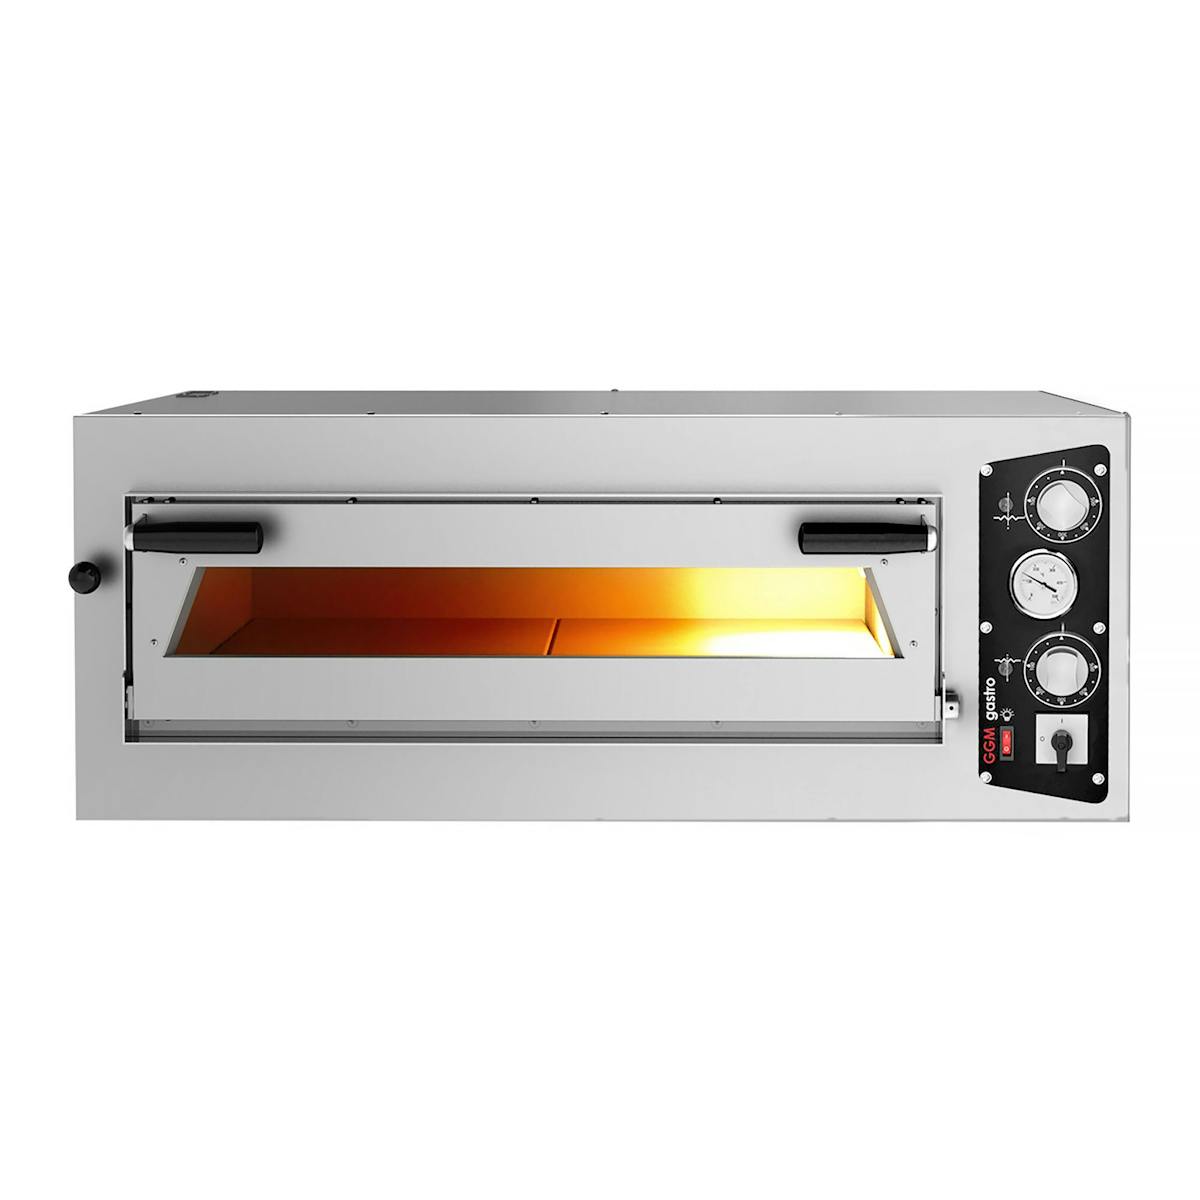 (2 pieces) Electric pizza oven - 4+4x 35cm - Manual